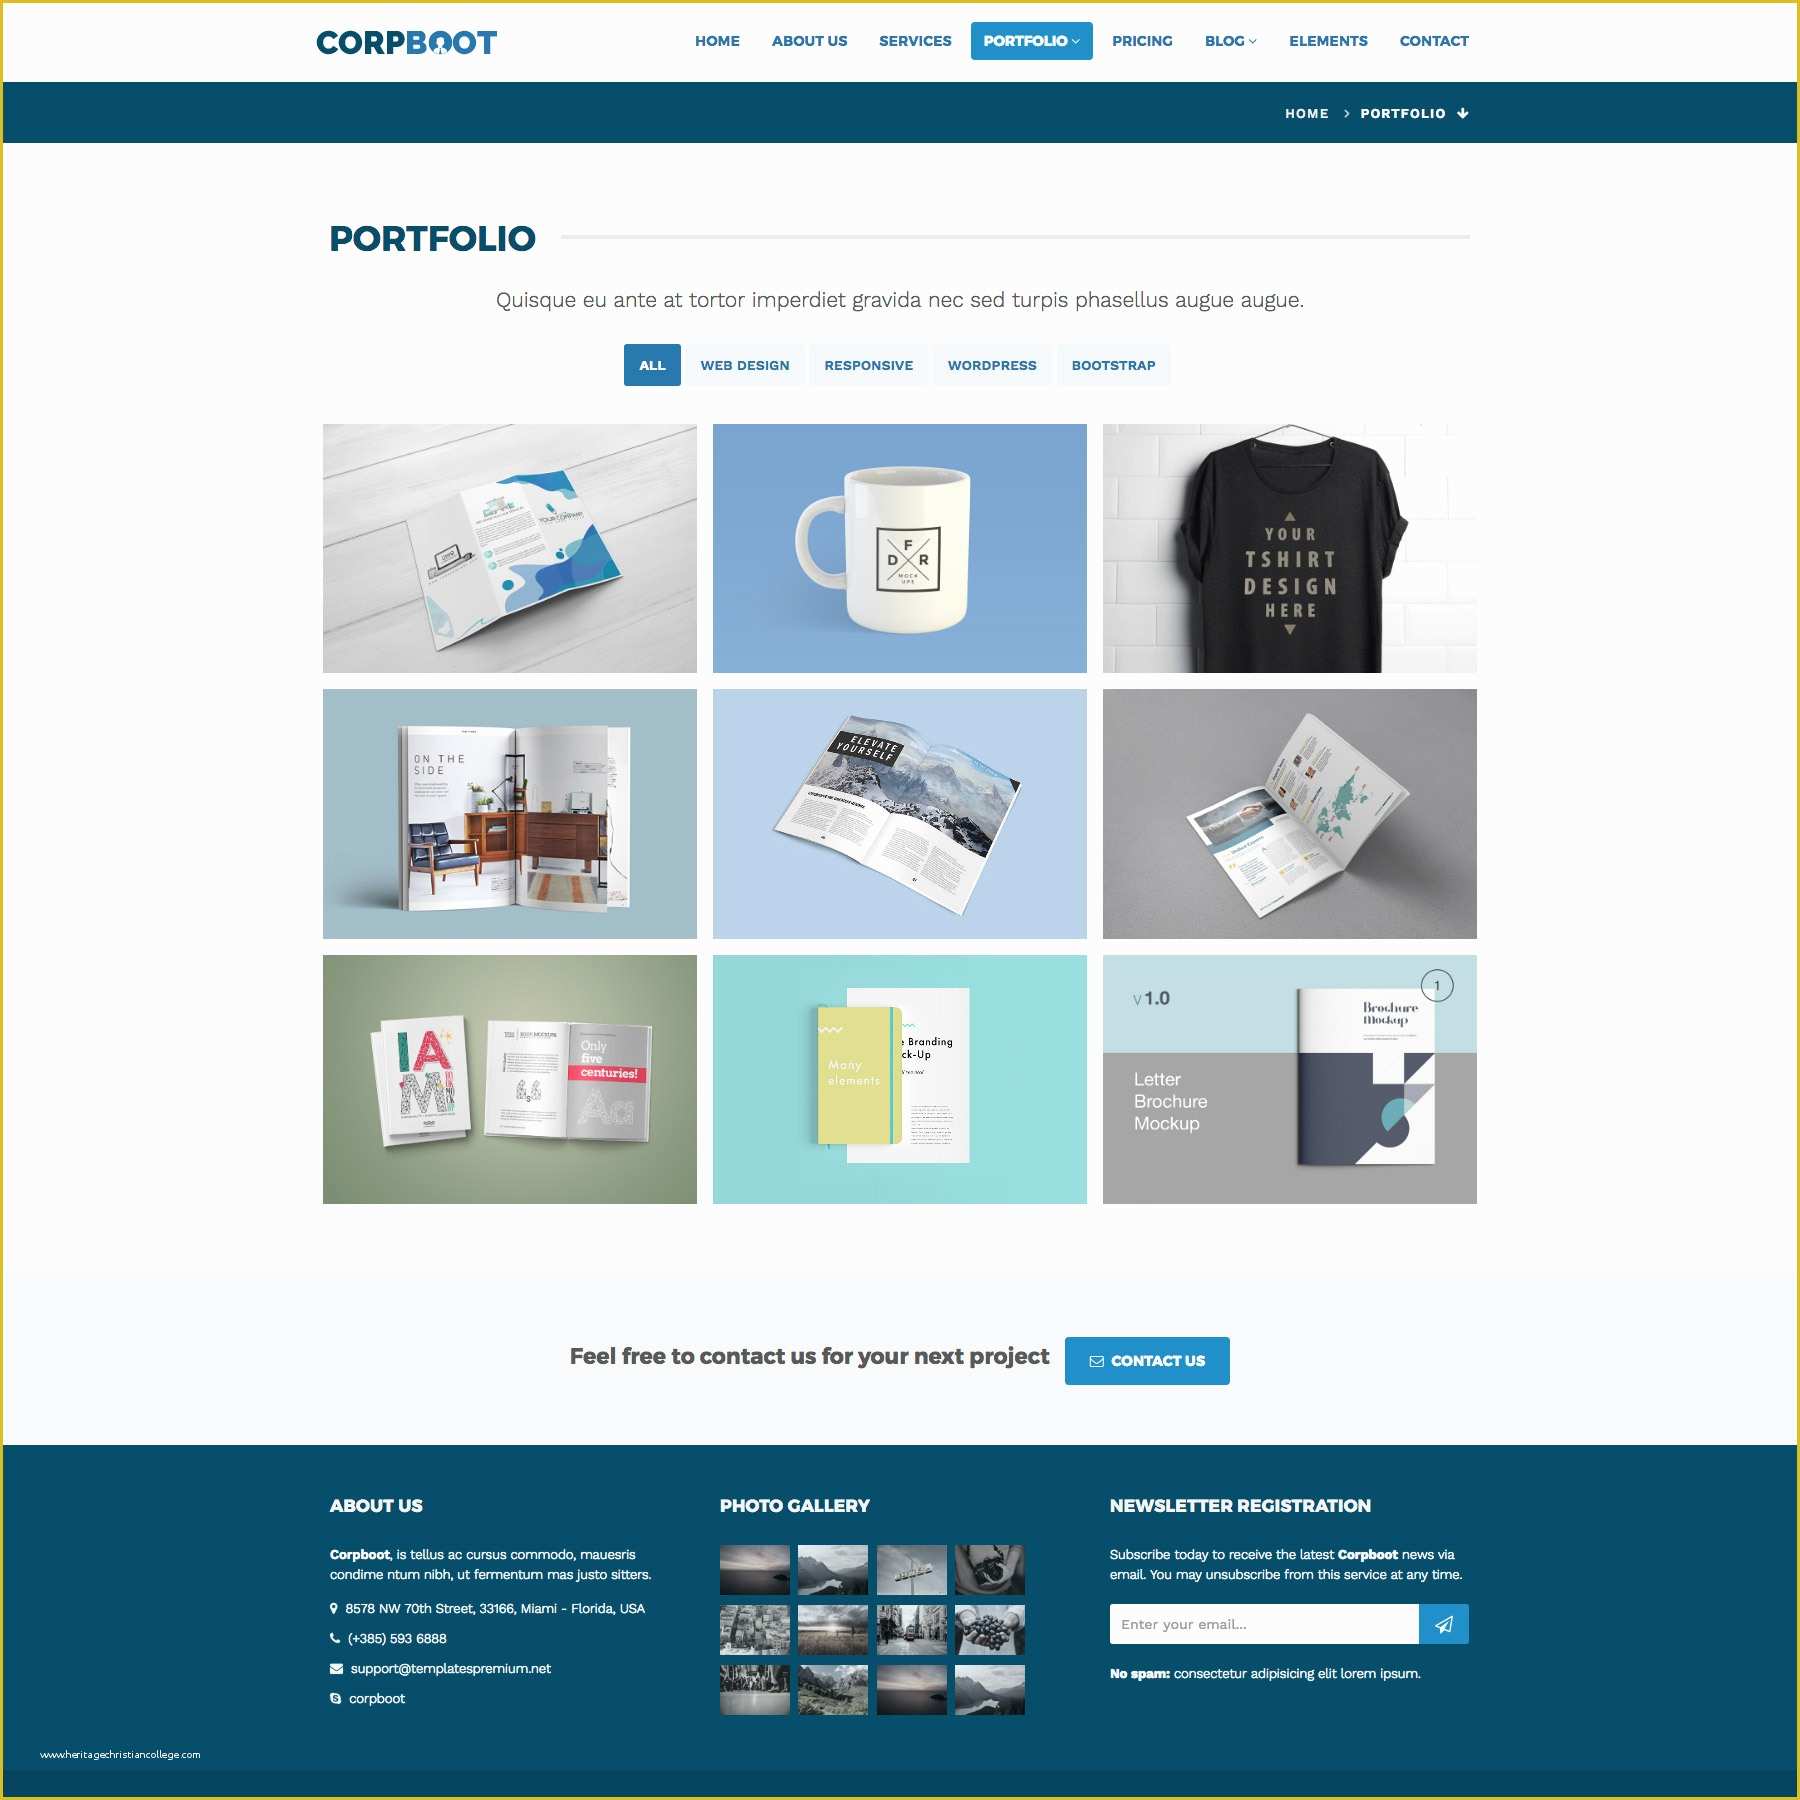 Marketplace Website Template Free Of Corpboot Corporate Website Template themes & Templates